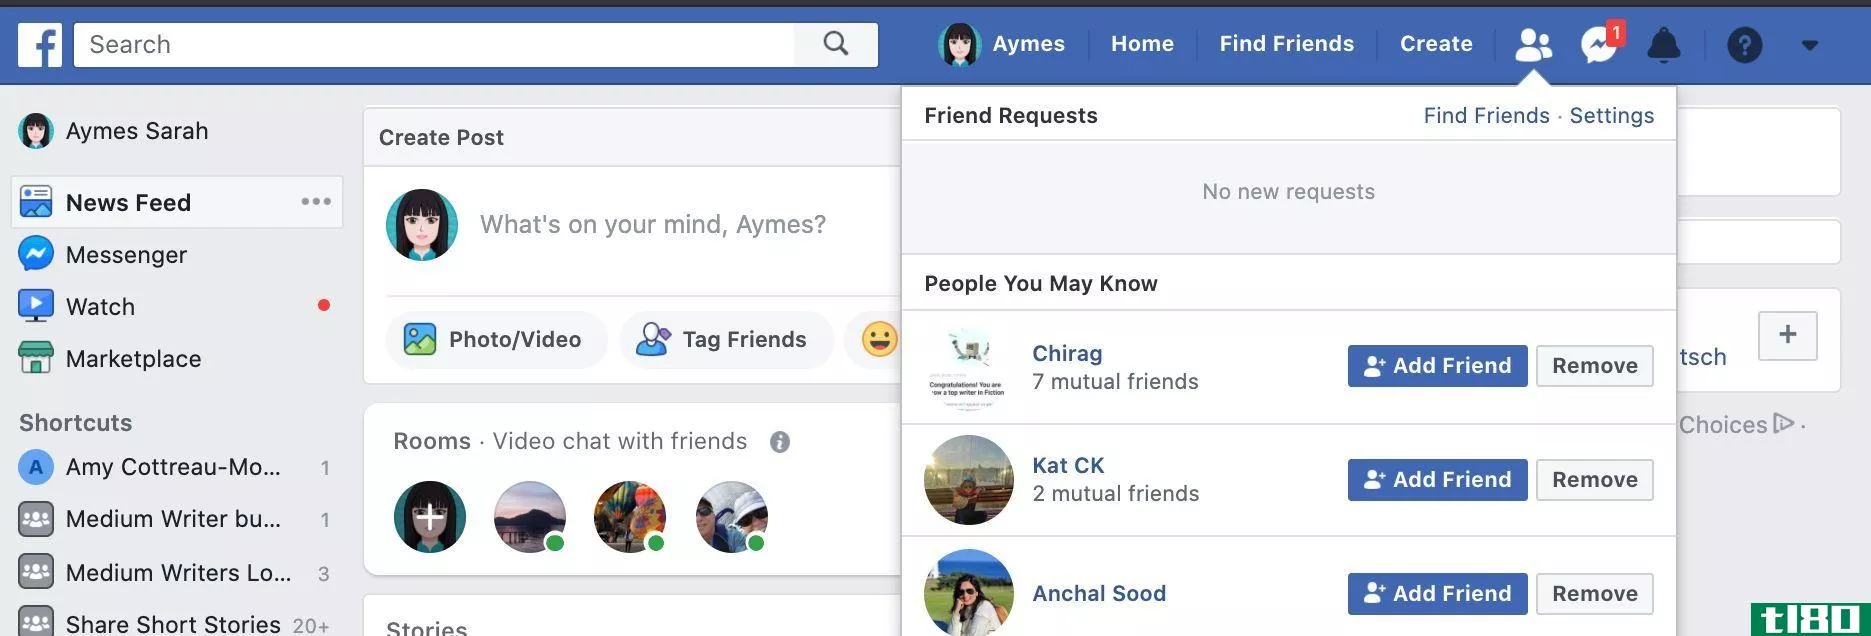 Facebook friend requests and timeline